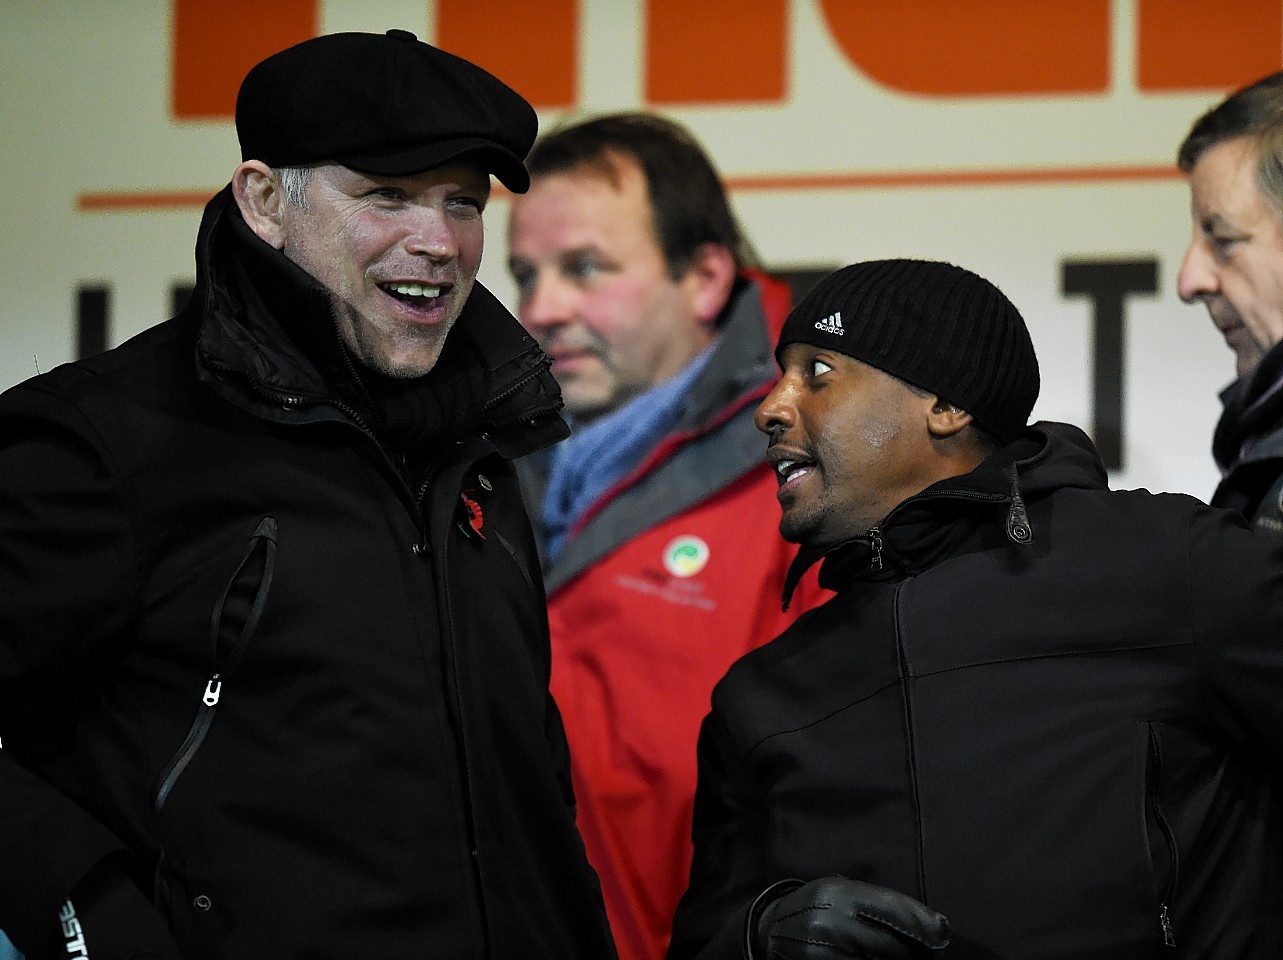 Russell Latapy and John Hughes at last night's match between Dundee United and Ross County